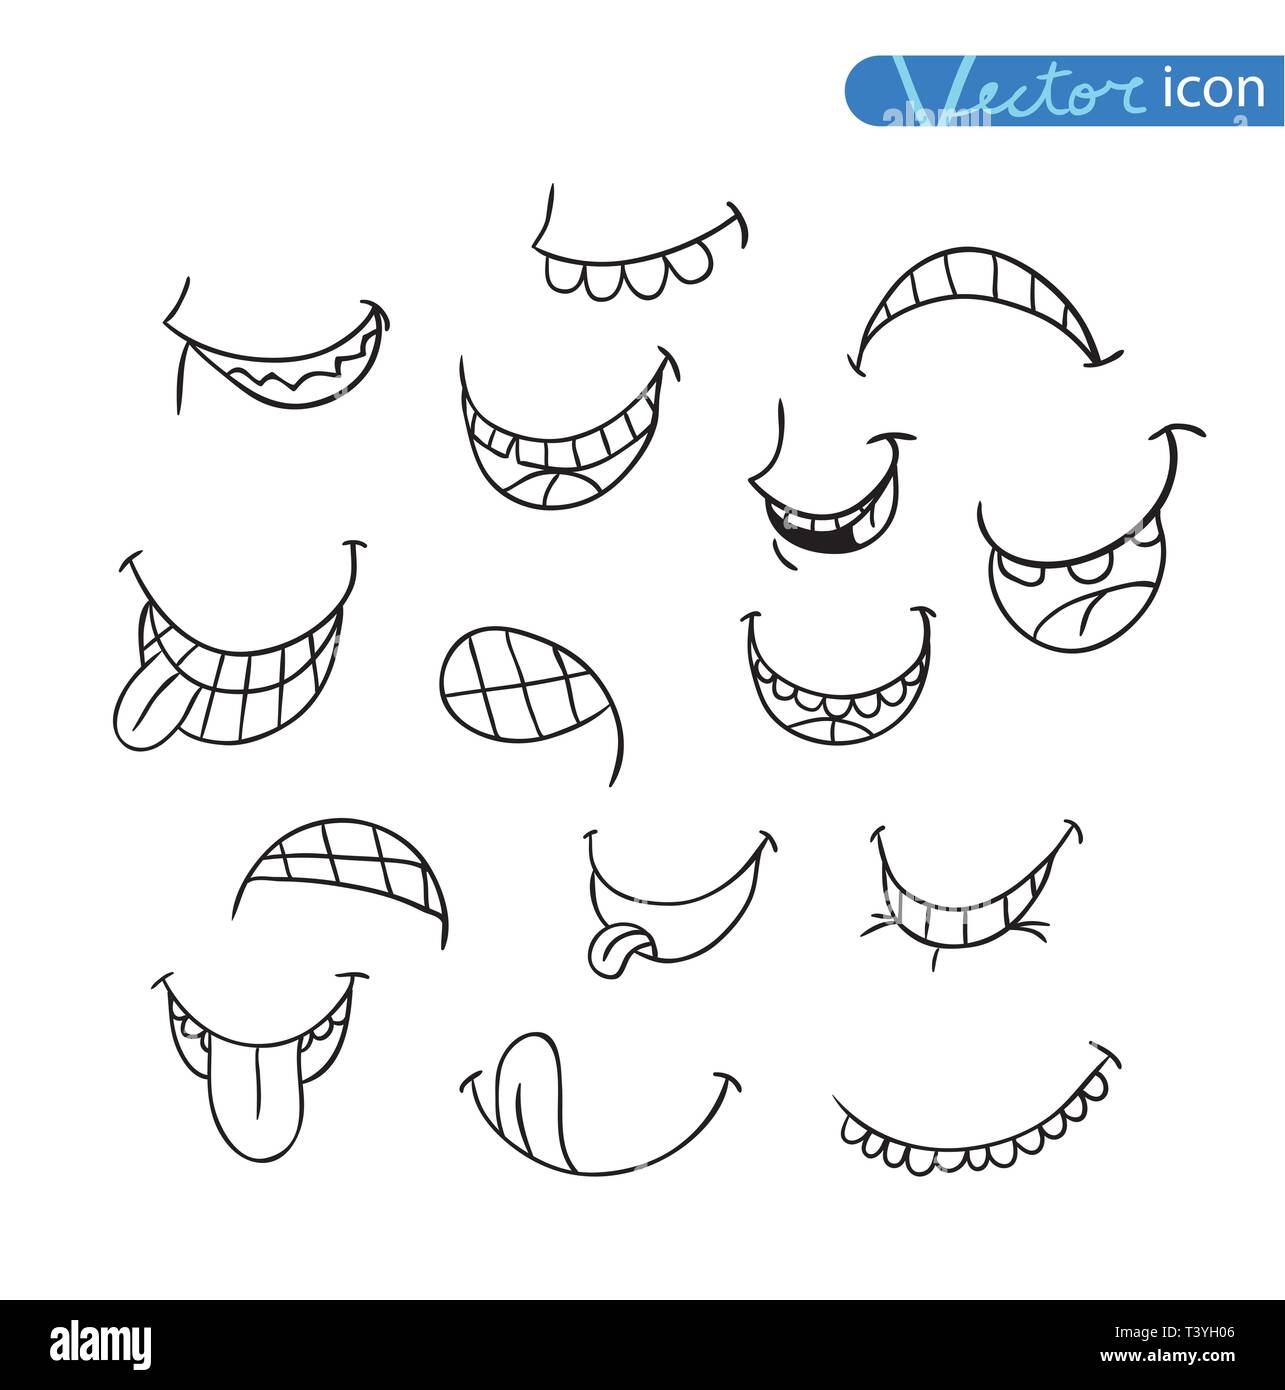 mouths collection in different expressions. vector icon illustration ...